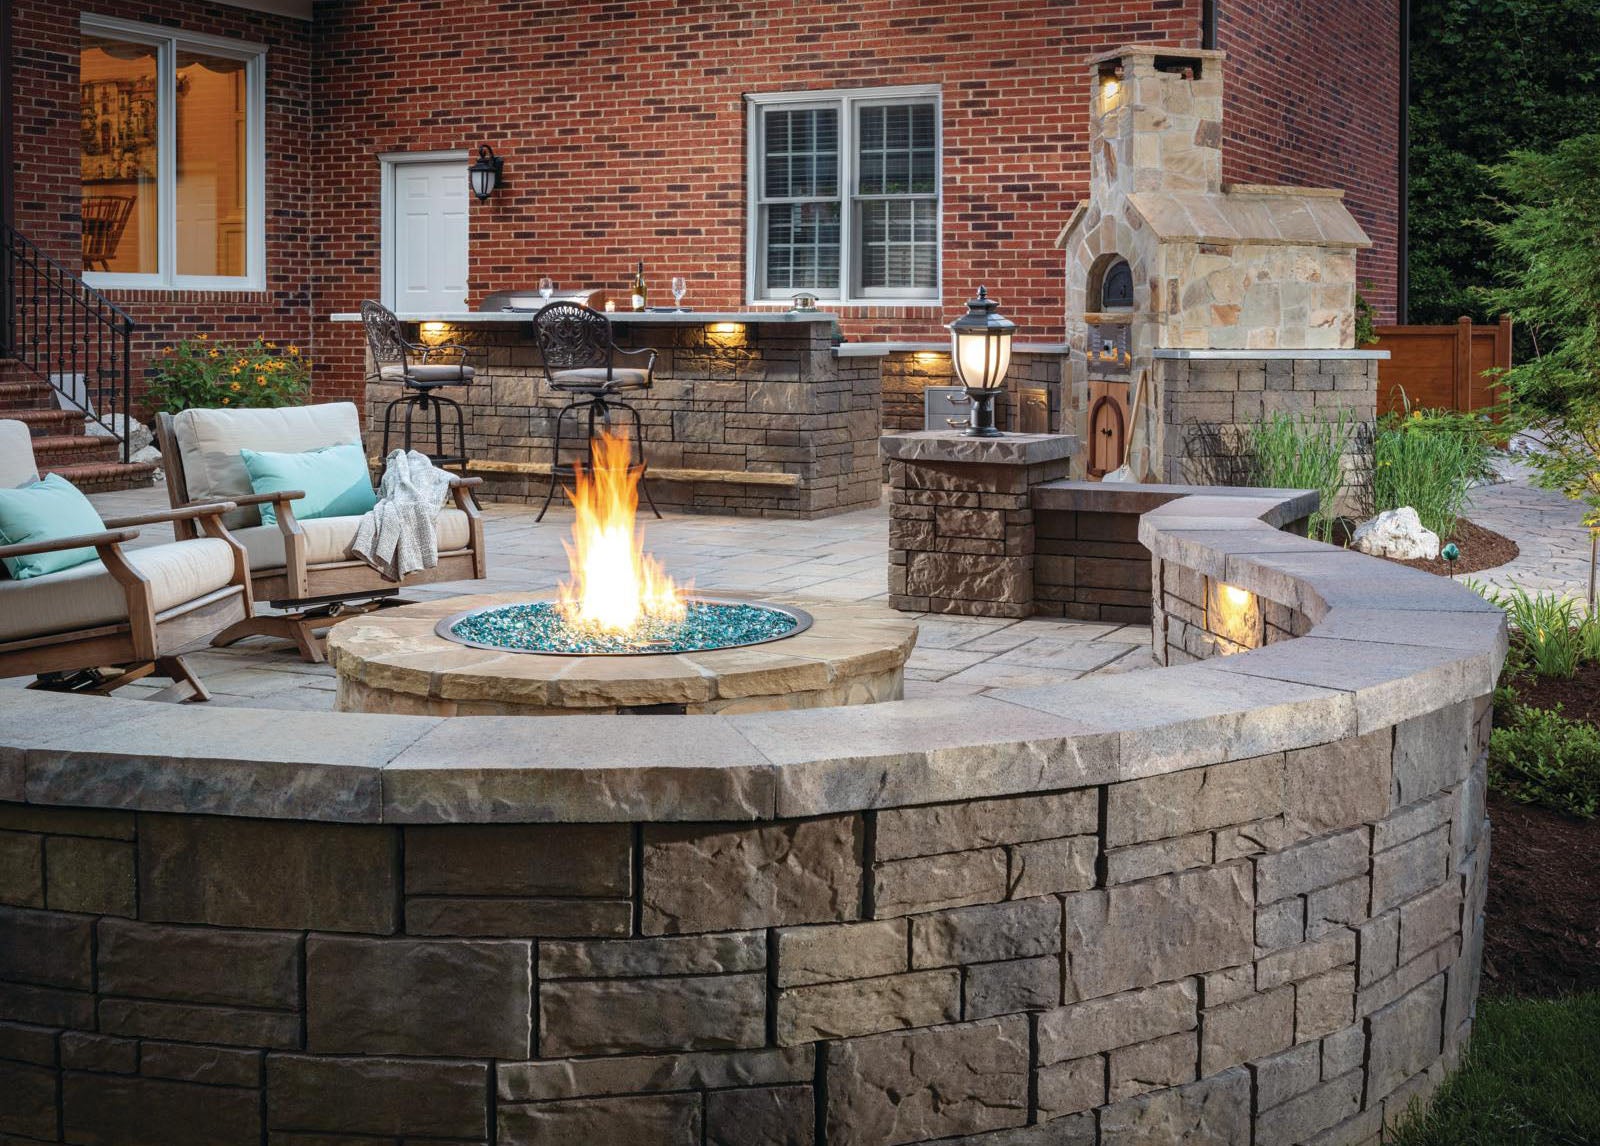 Designing A Patio Around Fire Pit, Best Fire Pits For Covered Patios